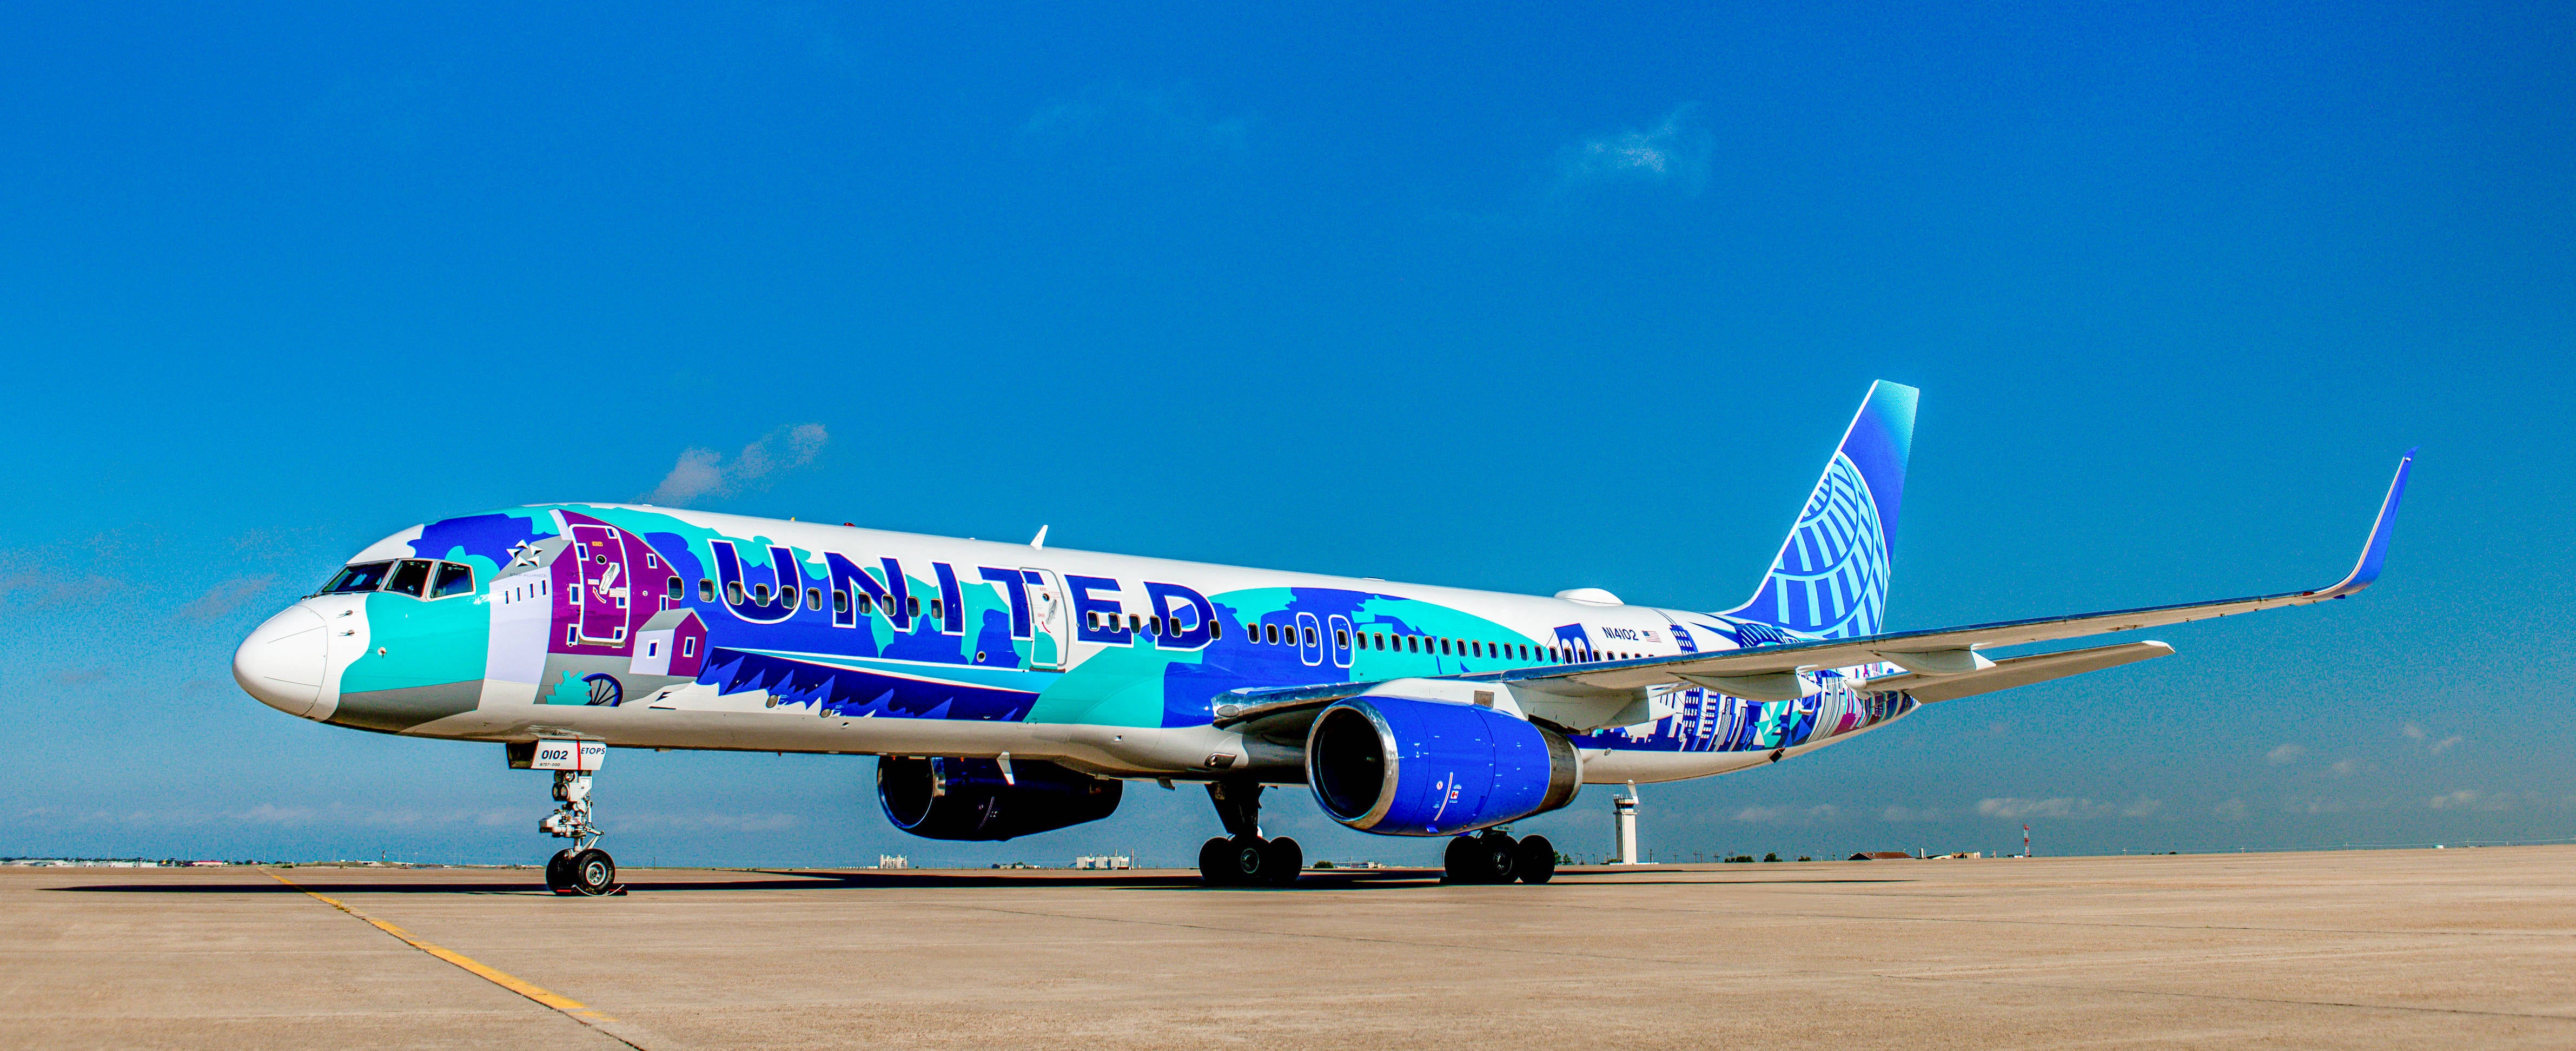 United Airlines rolled out its newest special aircraft livery Thursday